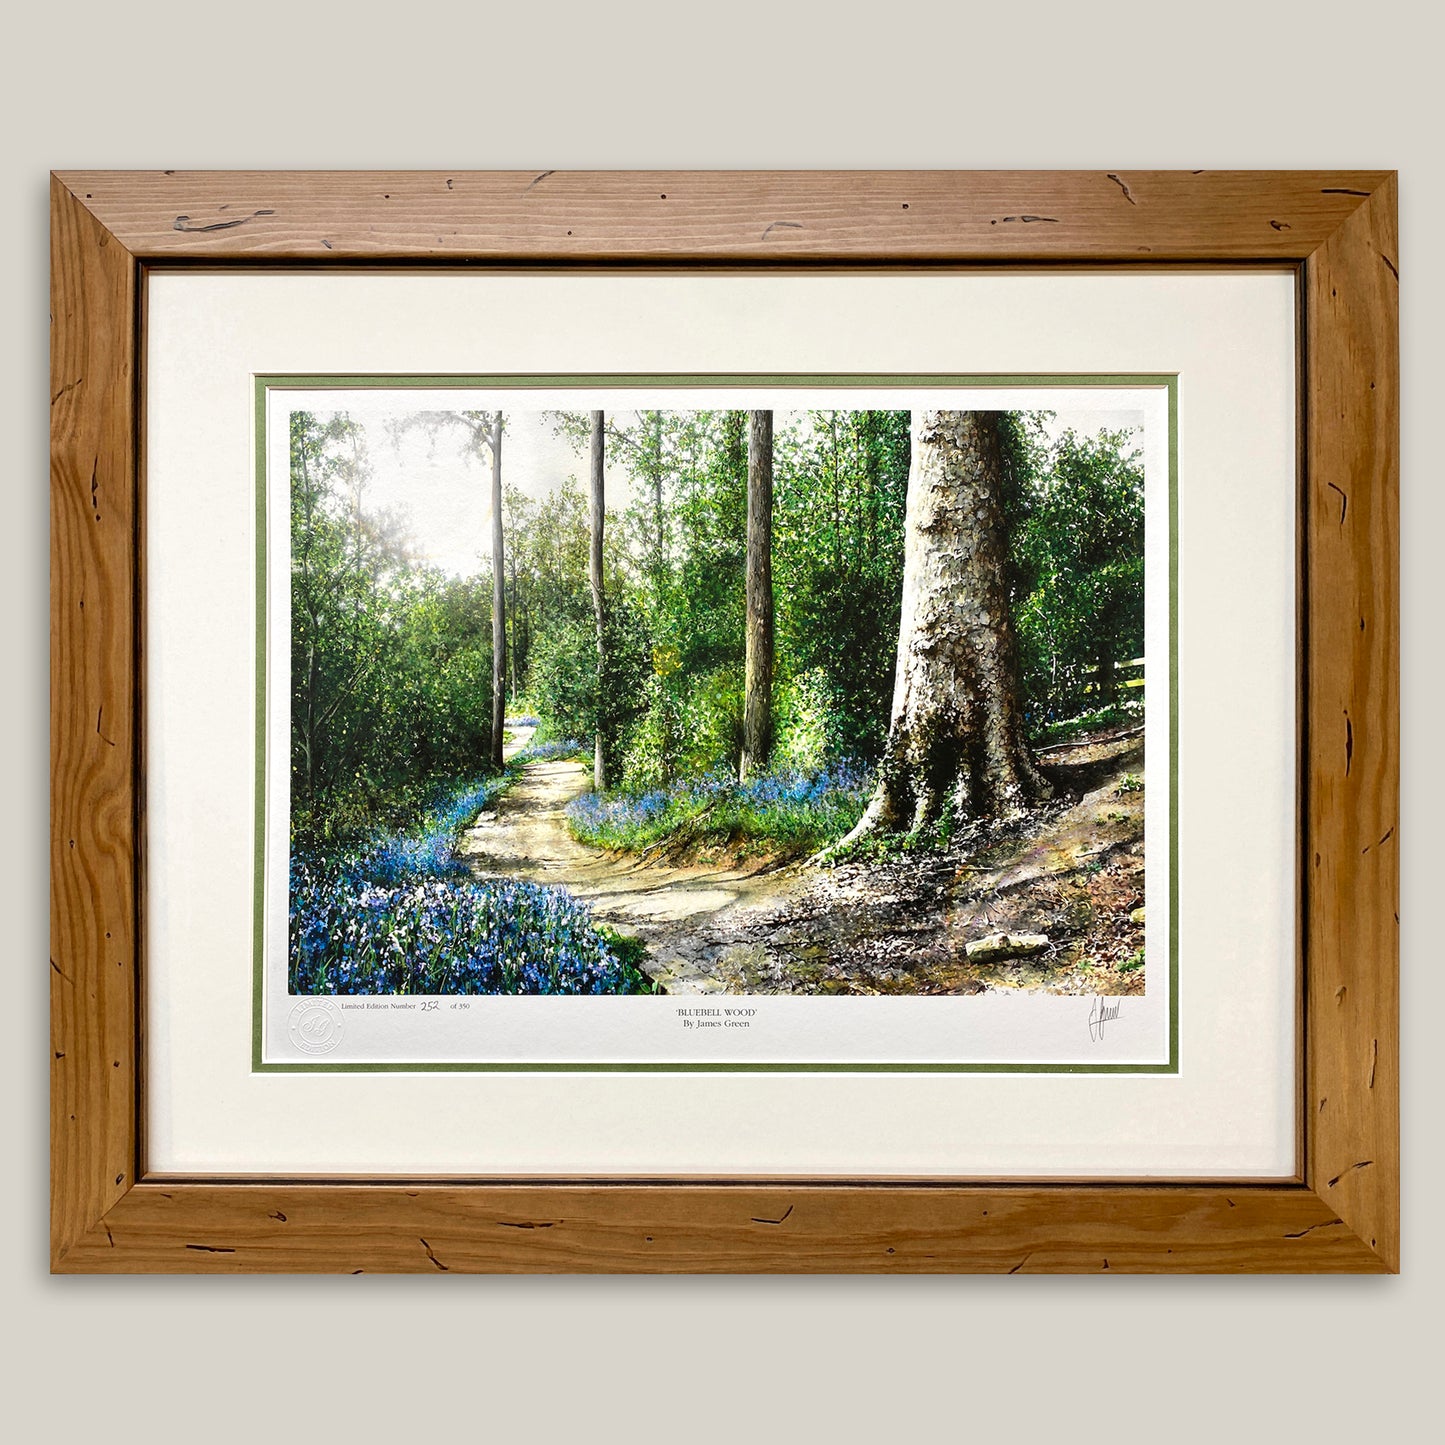 Bluebell Wood Limited Edition Print